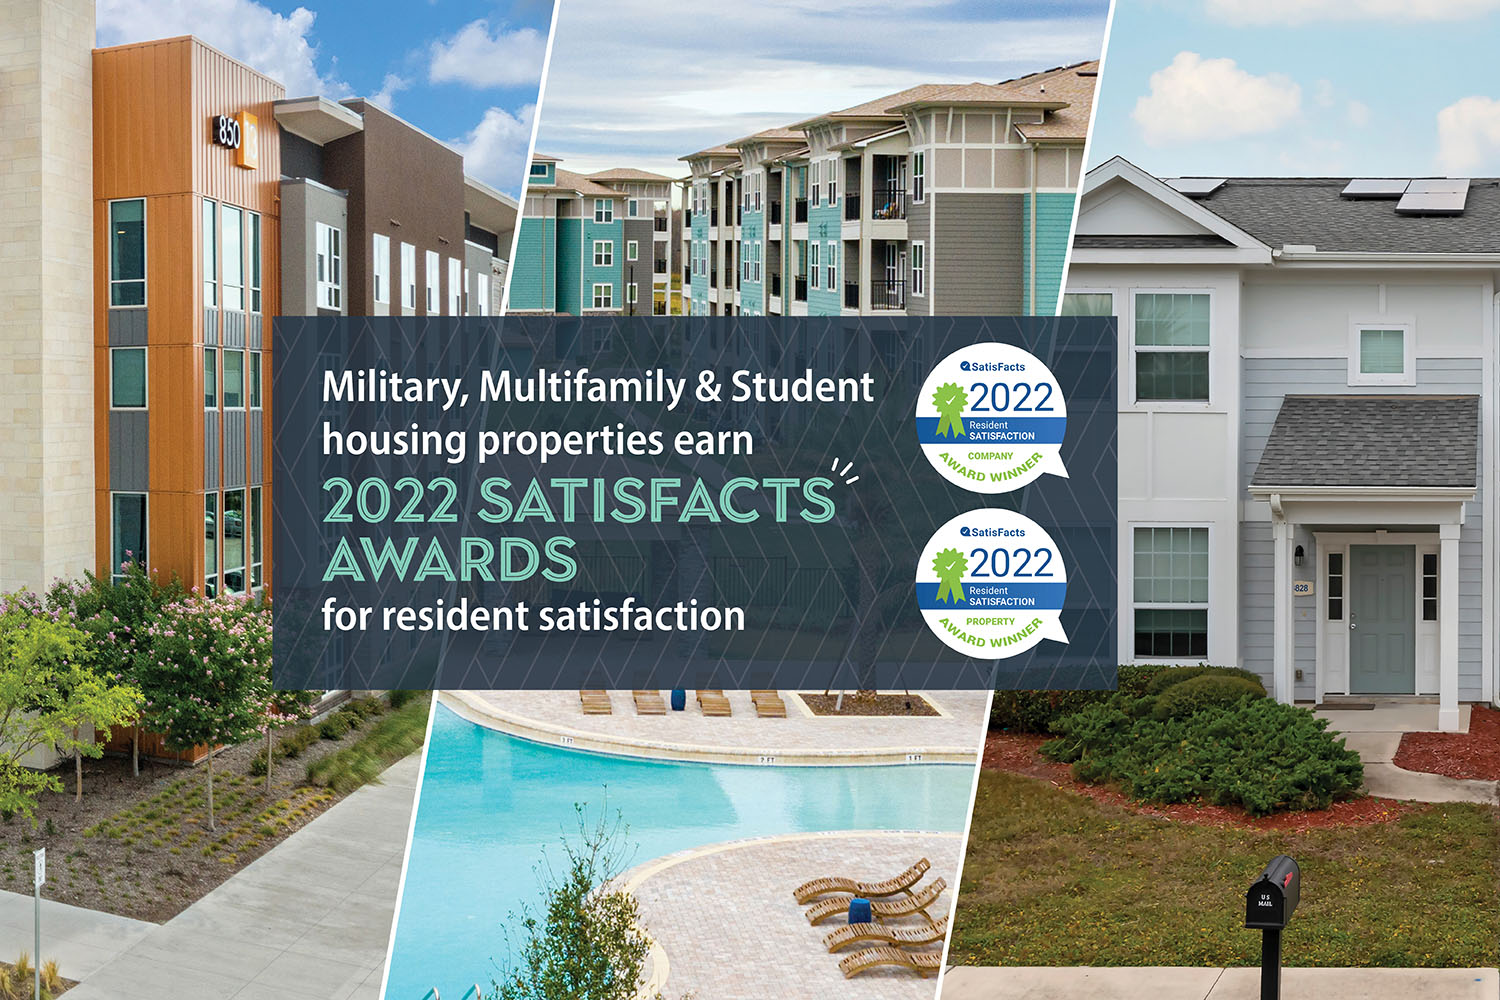 Balfour Beatty Communities Earns Multiple National Resident Satisfaction Awards for Excellence in Military, Multifamily, and Student Housing 